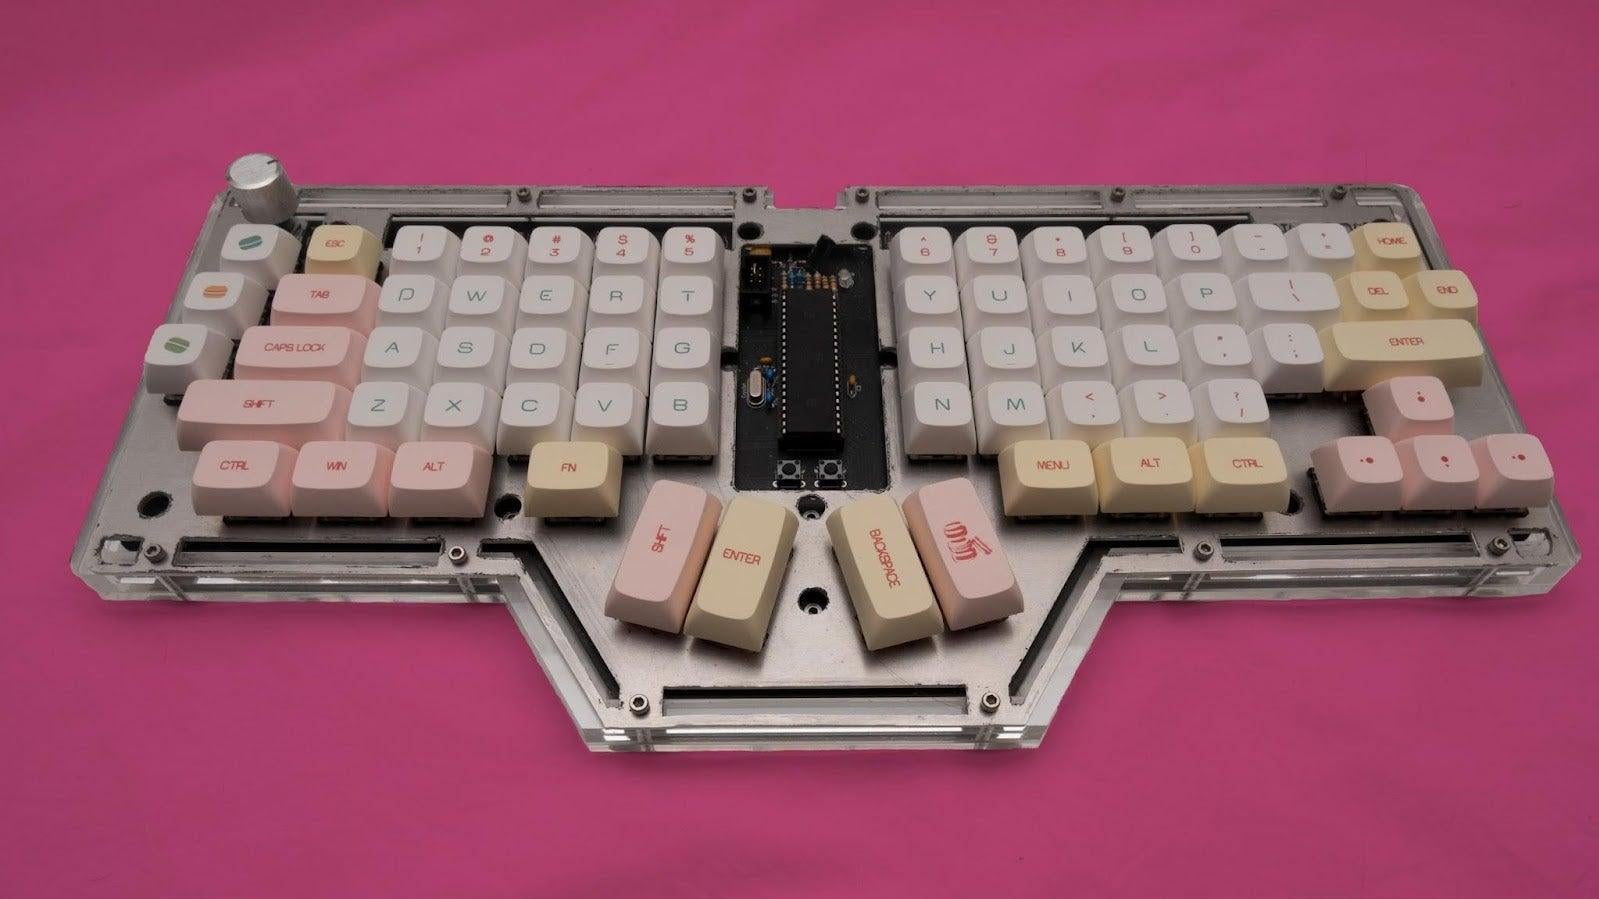 Now that's one keyboard you won't find on store shelves.  (Photo: OrthocodeKB)